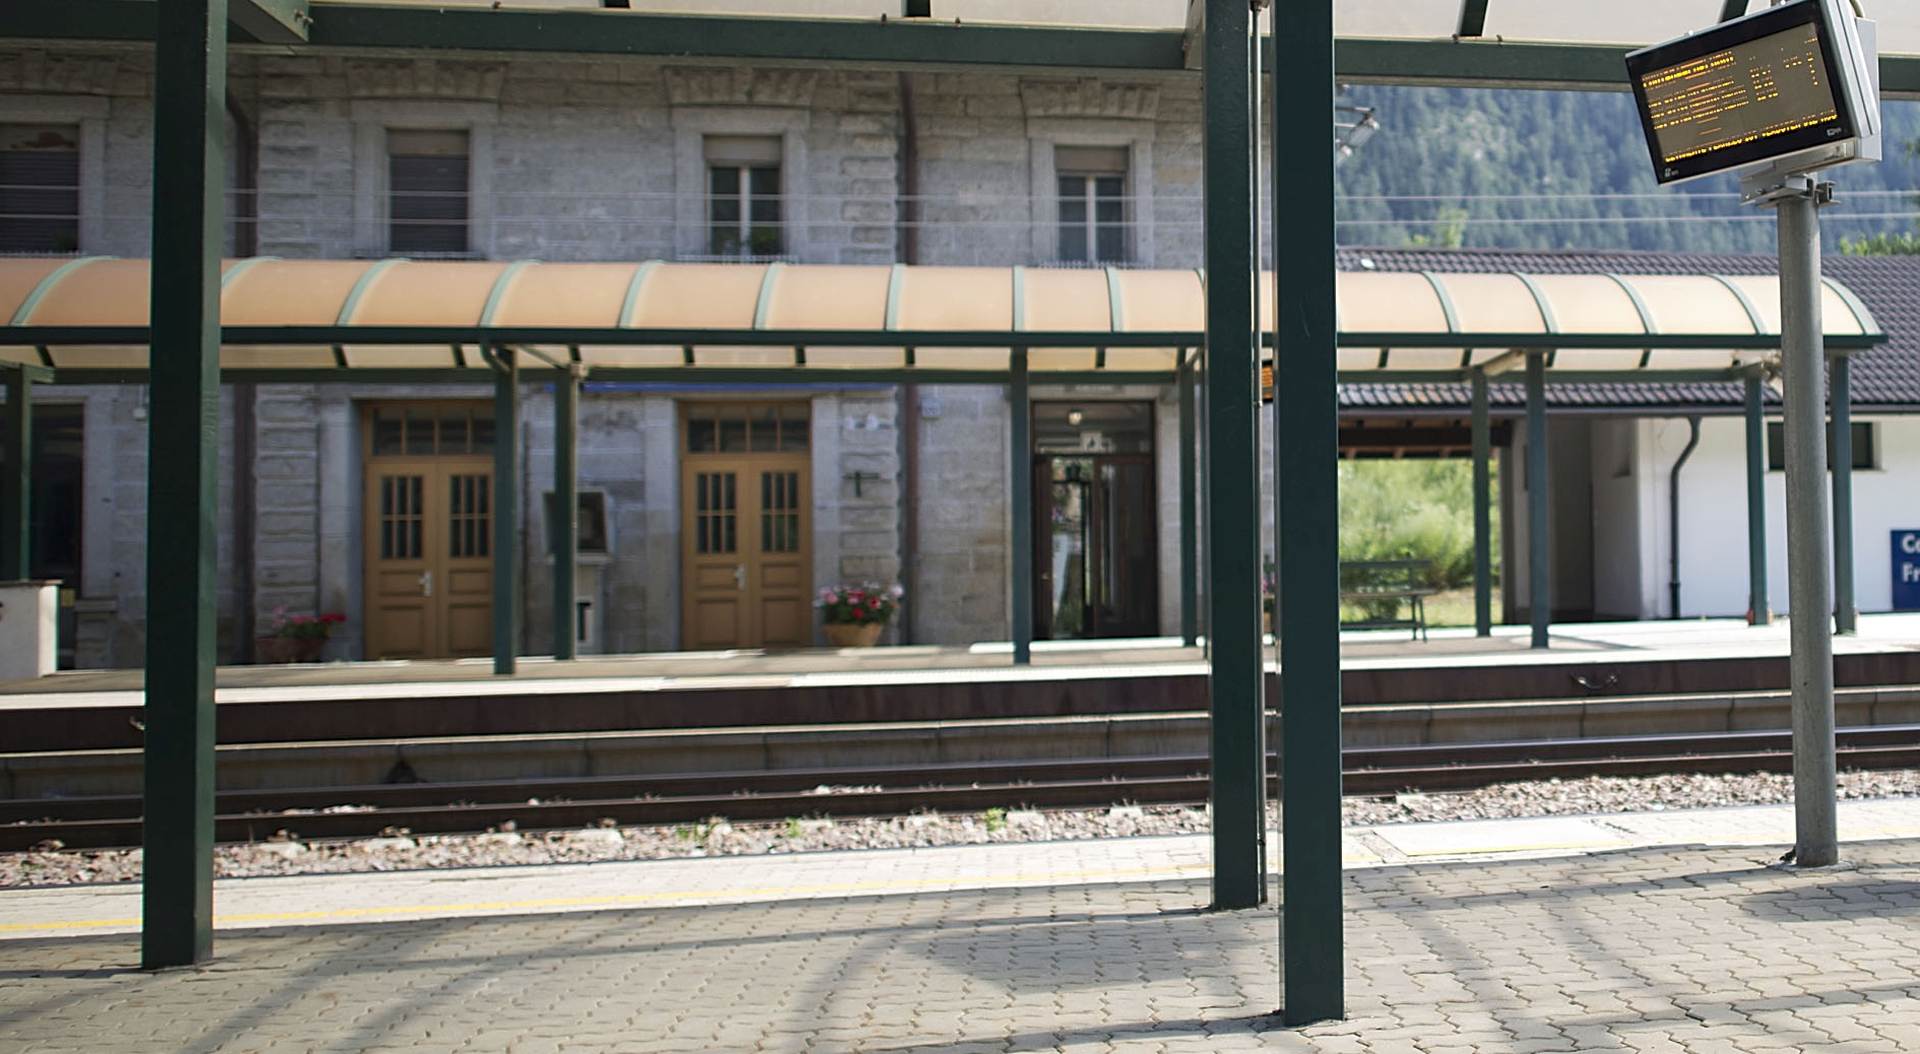 BOLZANO, ITALY - JULY 21:  Abel (L), a 19-year-old from Ethiopia, looks on while walking in an abandoned train station after being asked to leave the train, he could not effort the ticket, in an attempt to reach the Brenner Pass at the Austrian border on 21 July, 2015, in Bolzano, Italy. Abel and approximately 40 other refugees from Ethiopia arrived by night train from Rome this morning and aid workers supplied them with food and water. The refugees say they are trying to reach Sweden, where they will apply for asylum. According to local politicians up to 100 refugees and migrants pass through the city of Bolzano daily. Abel's journey has so far taken seven months, including crossing the Mediterranean Sea by a small boat with 105 other migrants to the Italian island of Lampedusa, for which Abel says he paid smugglers USD 3,000. European Union nations are currently discussing how to distribute 40,000 refugees camped in Italy and Greece more fairly throughout Europe, though some members, including Austria and the Czech Republic, are flat out refusing to accept any more refugees.  (Photo by Alexander Koerner/Getty Images)